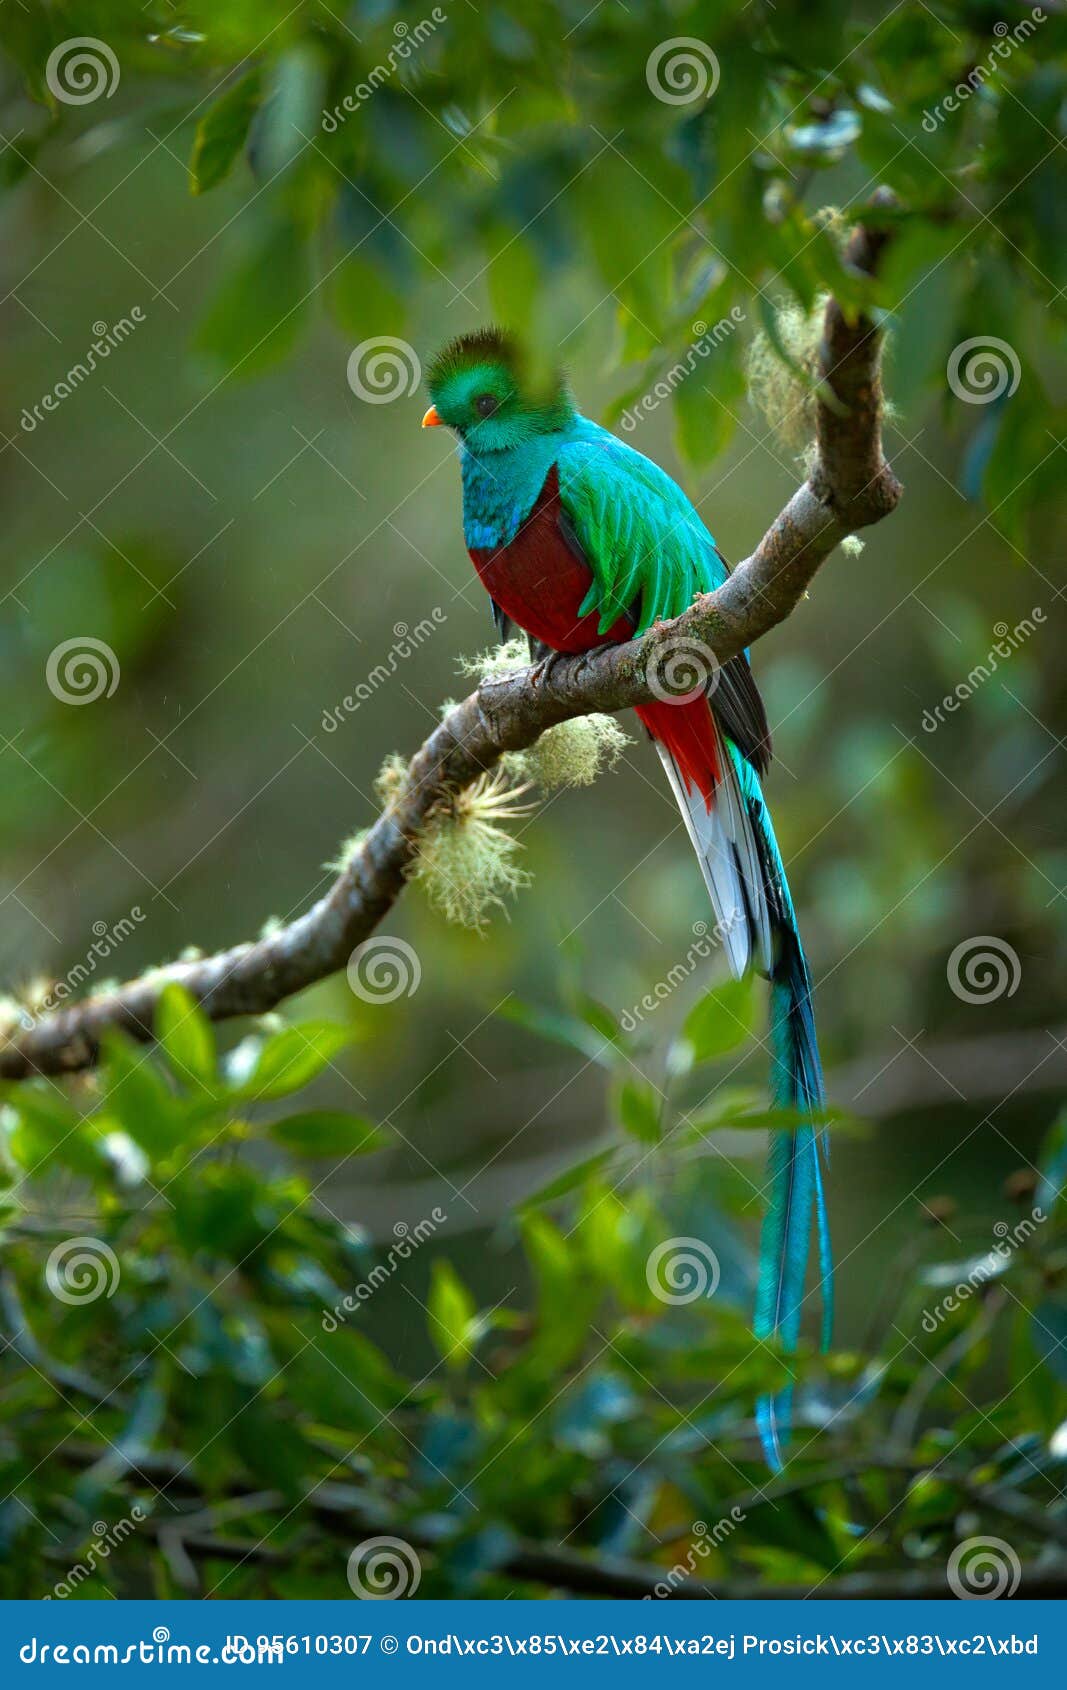 birdwatching in america. exotic bird with long tail. resplendent quetzal, pharomachrus mocinno, magnificent sacred green bird from